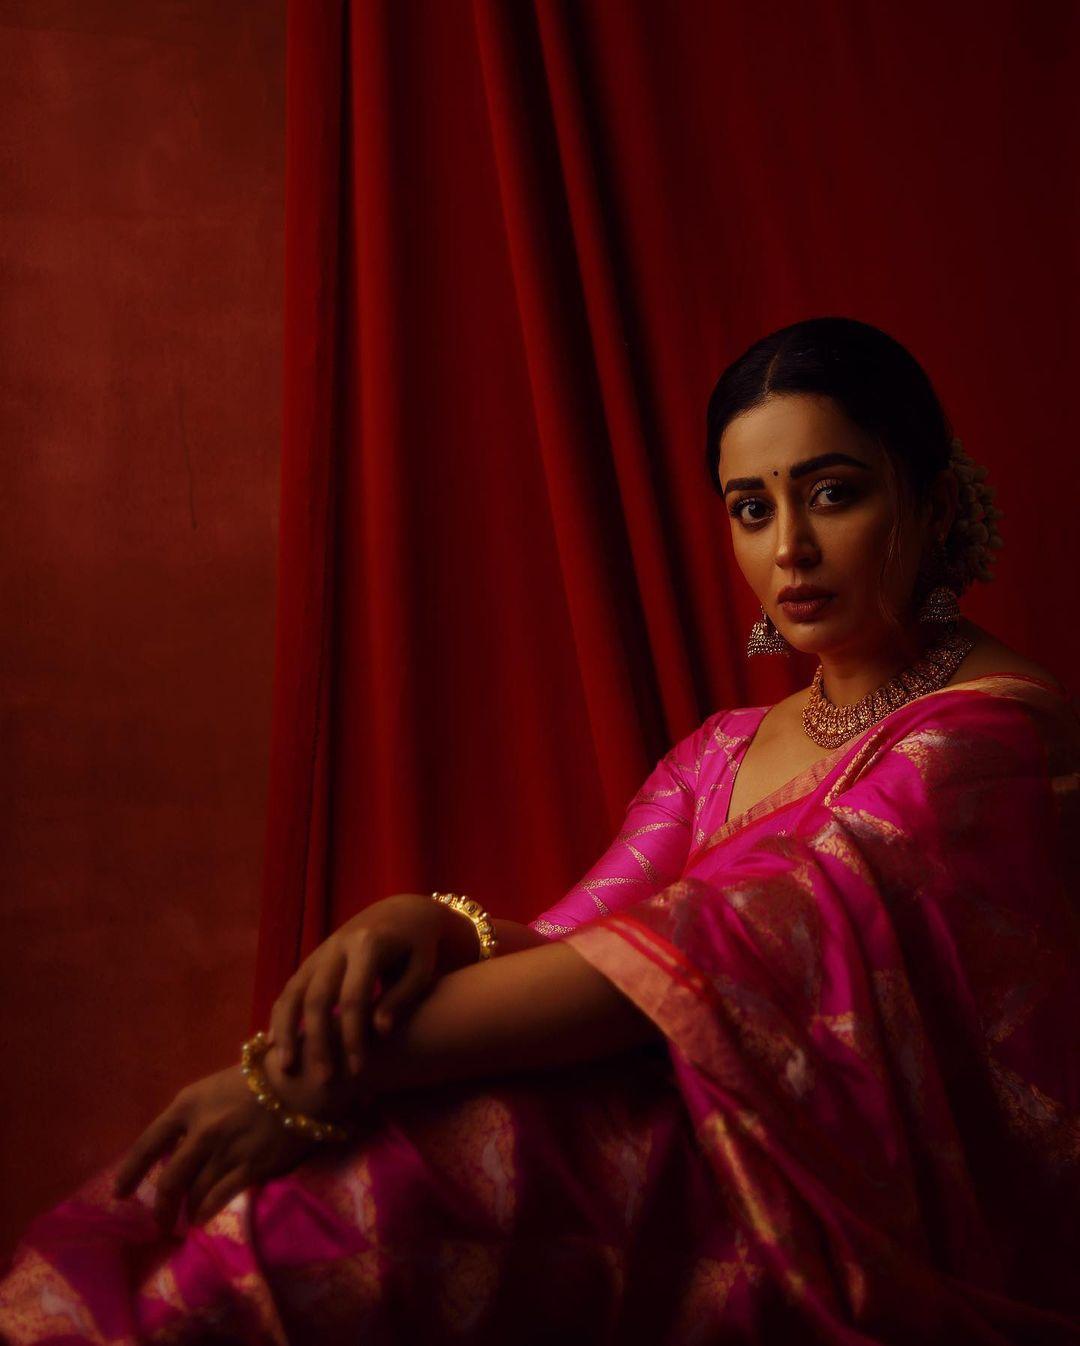 Such a beauty Neha Pendse is! The actress wore a stunning pink Pathani saree with golden designs on it